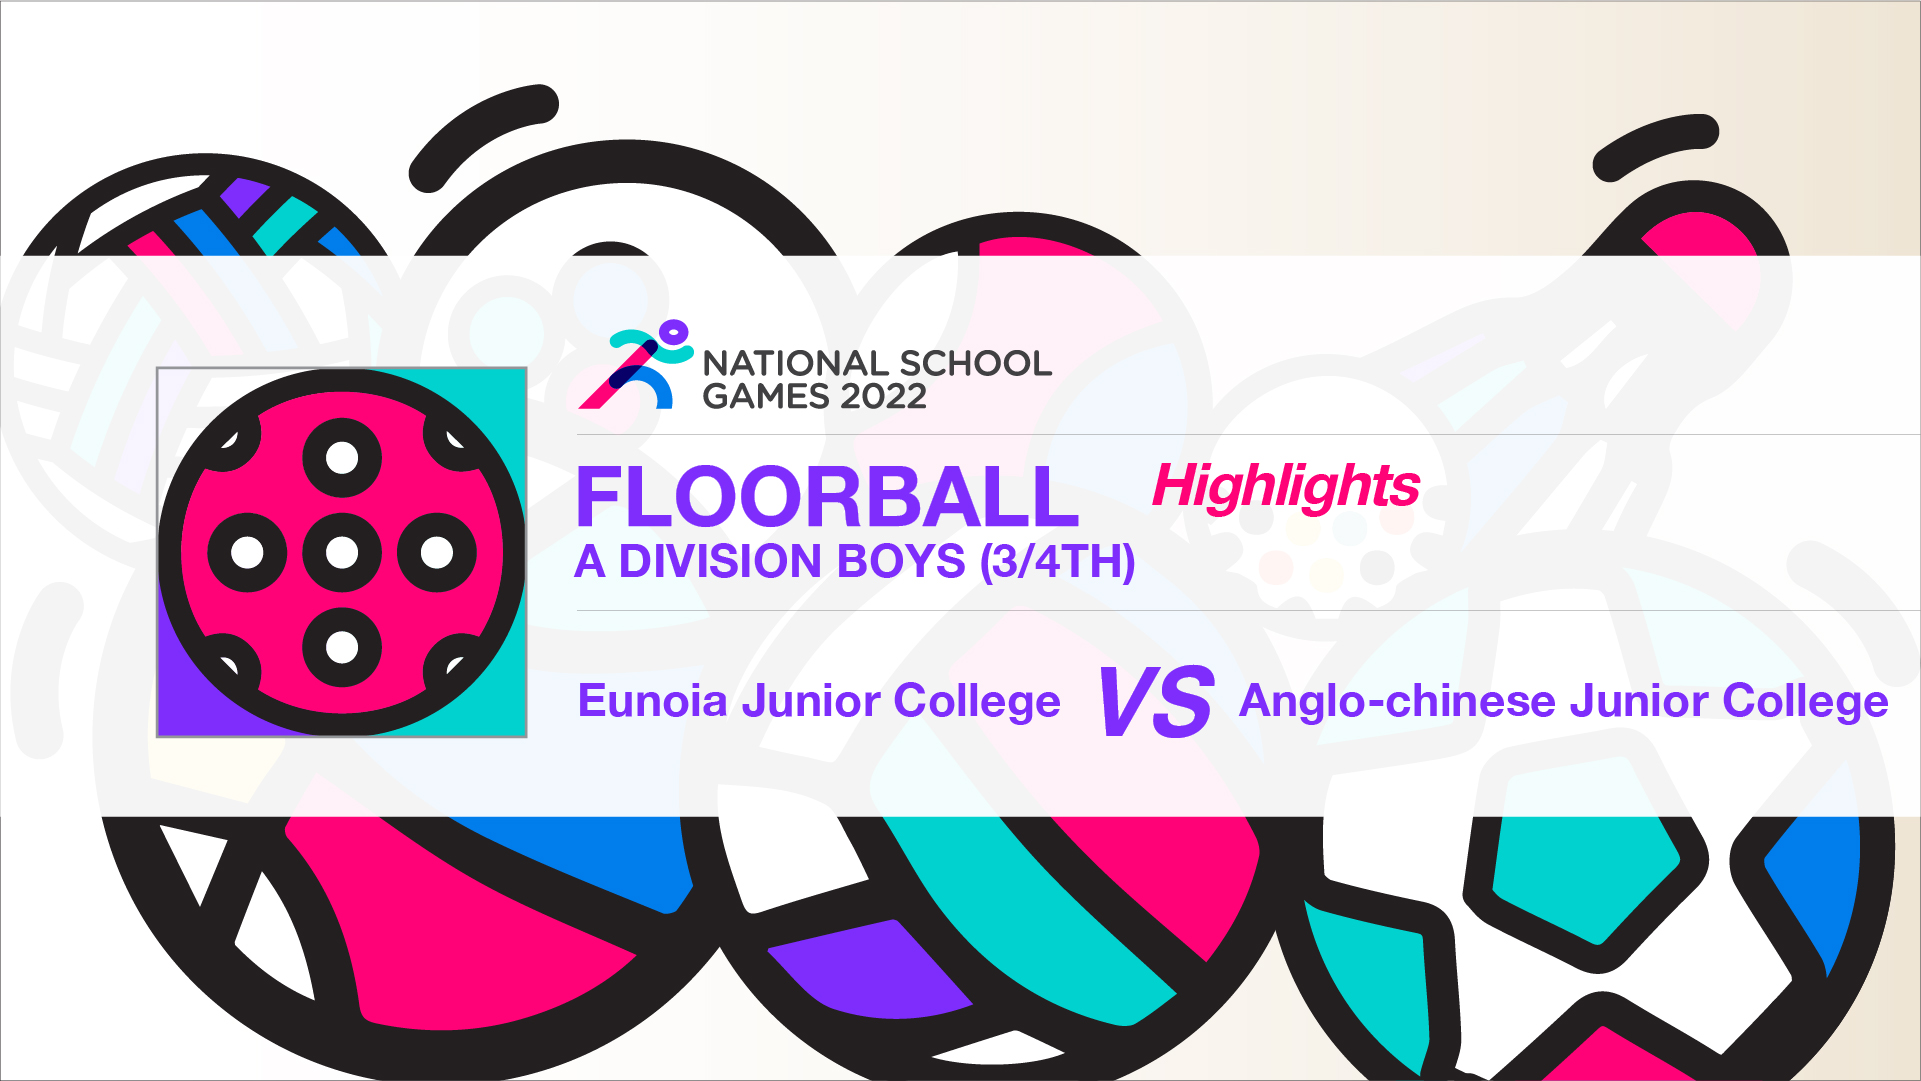 SSSC Floorball A Division Boys (3/4th) | Eunoia Junior College vs Anglo-Chinese Junior College - Highlights